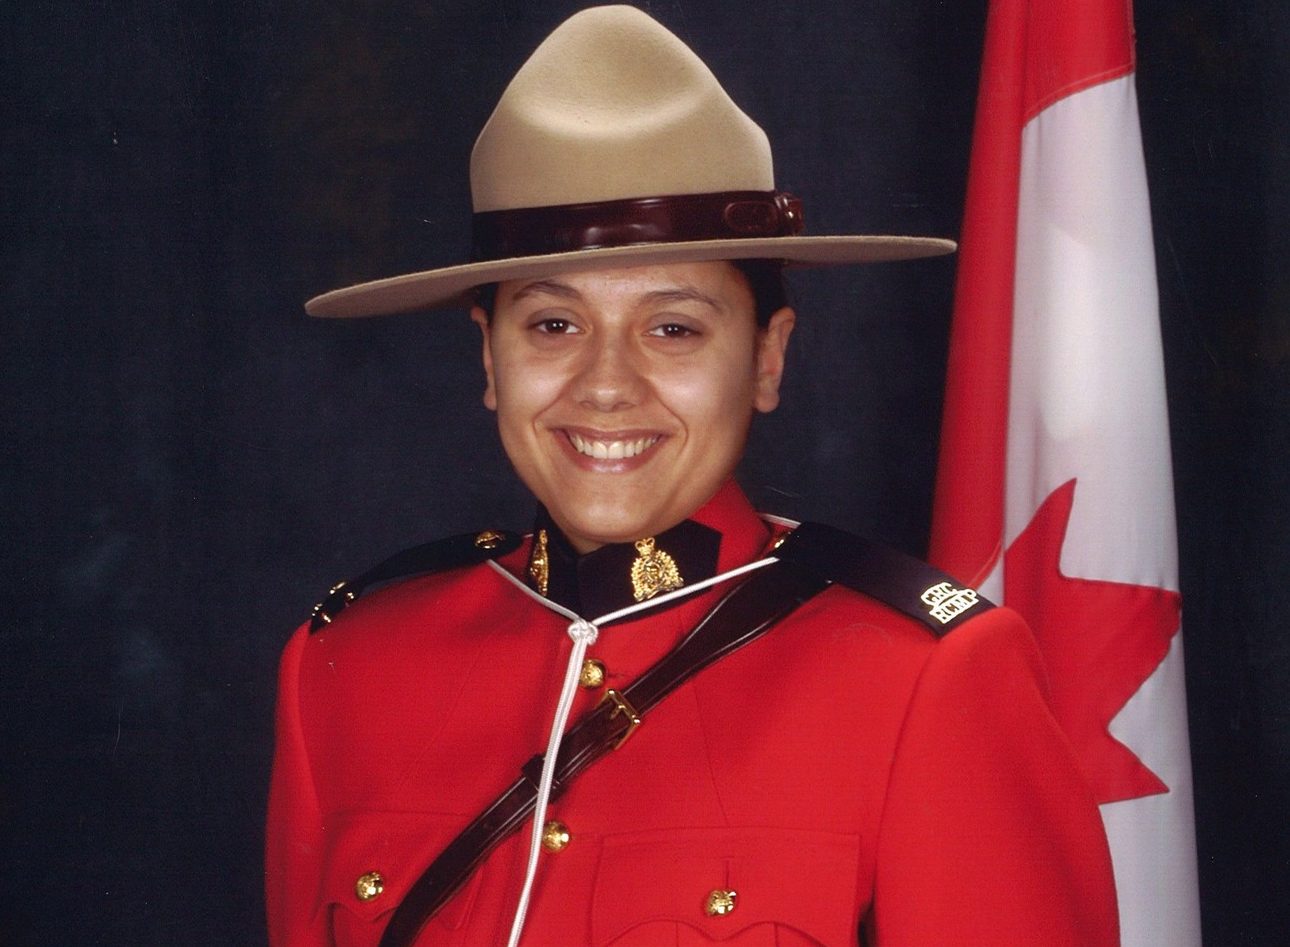 Constable Sarah Beckett is pictured in her full RCMP uniform in front of a Canadian flag